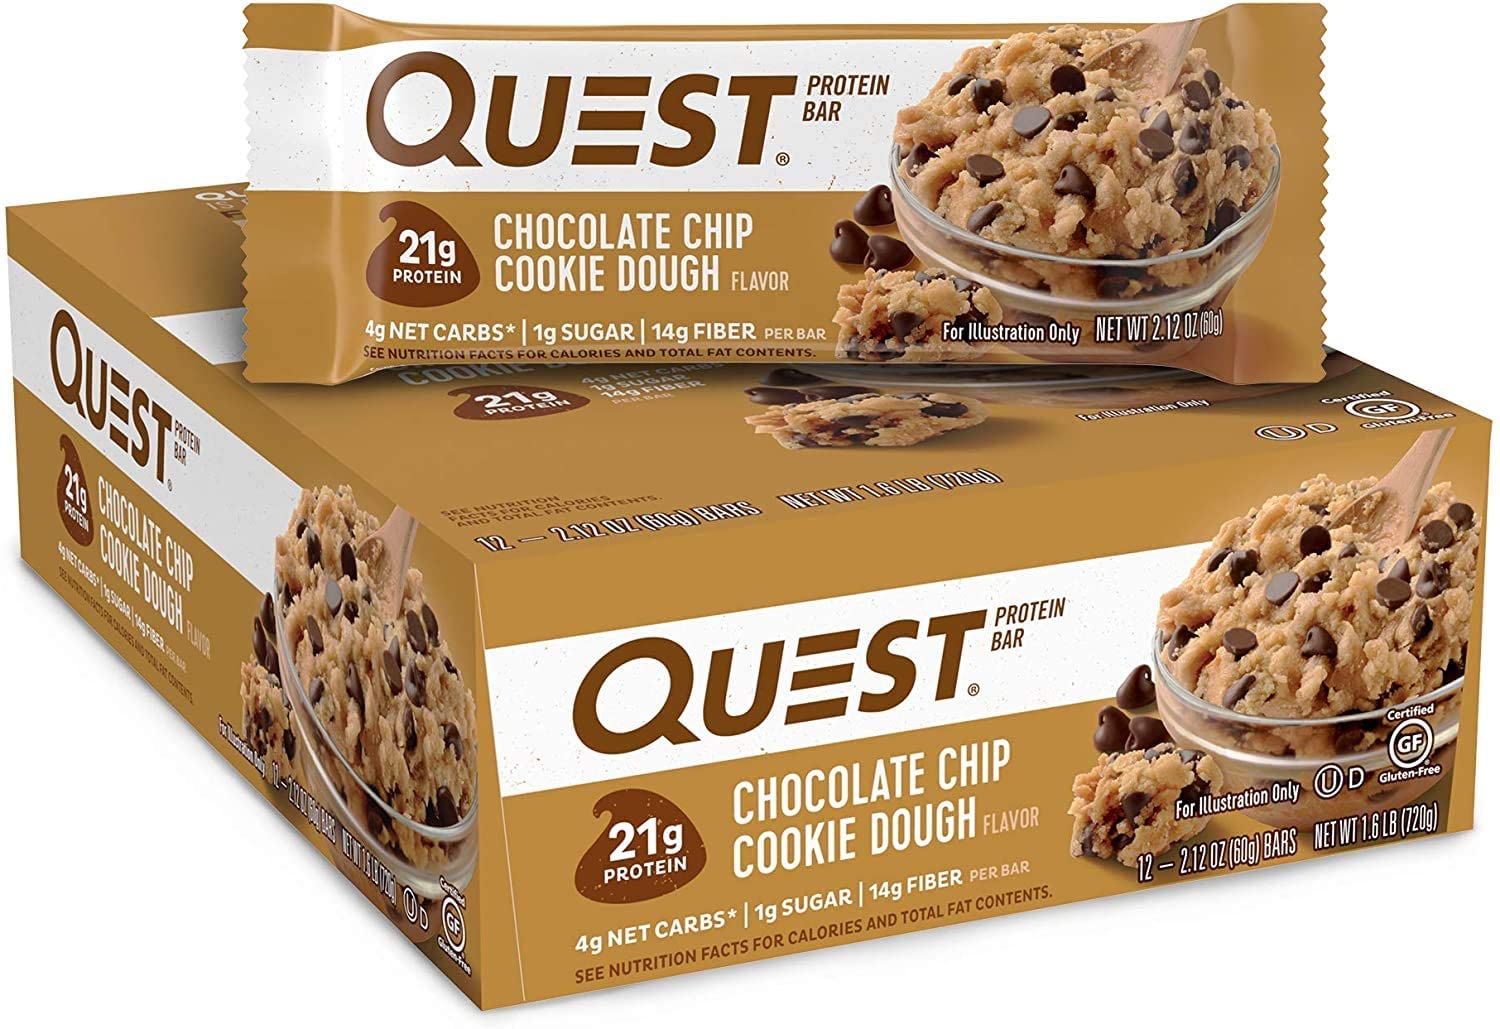 Quest Nutrition Protein Bar, Chocolate Chip Cookie Dough, High Protein Bars, 2.12 oz Bar, 12 Count~$13.64 @ Amazon~Free Prime Shipping!